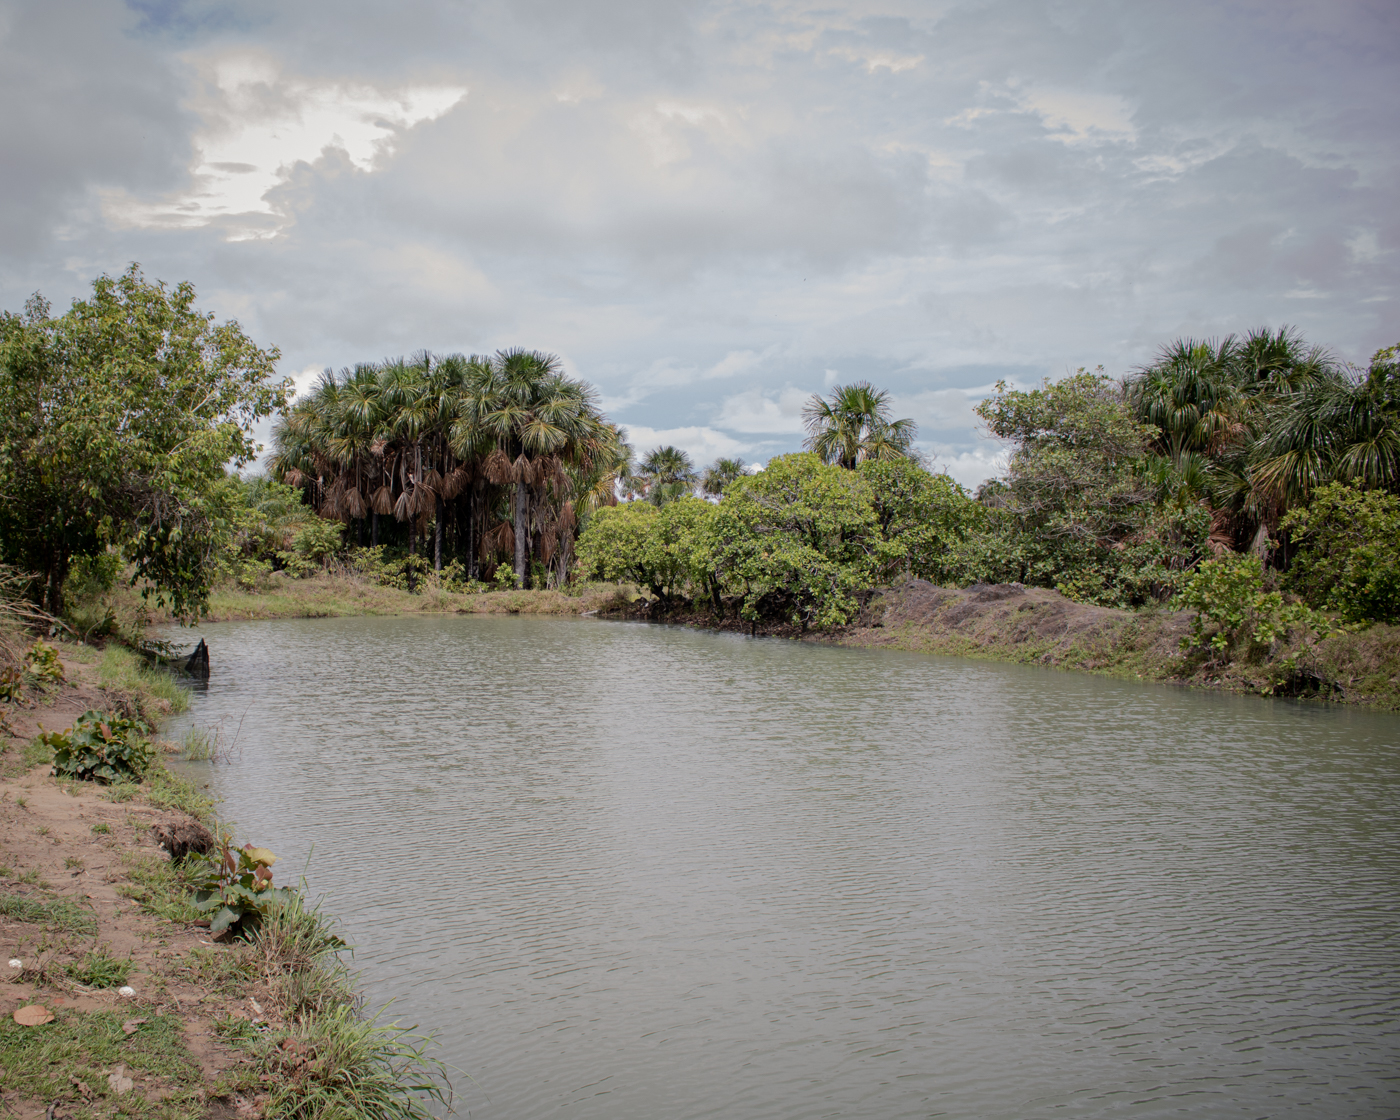 The Tabalascada farmers’ association’s fish pond is located behind the home of Andreia Machado and Deodato Leocadio da Silva Filho. In the community, nearly all production, from crops to poultry to fish, is traded and consumed within the community.